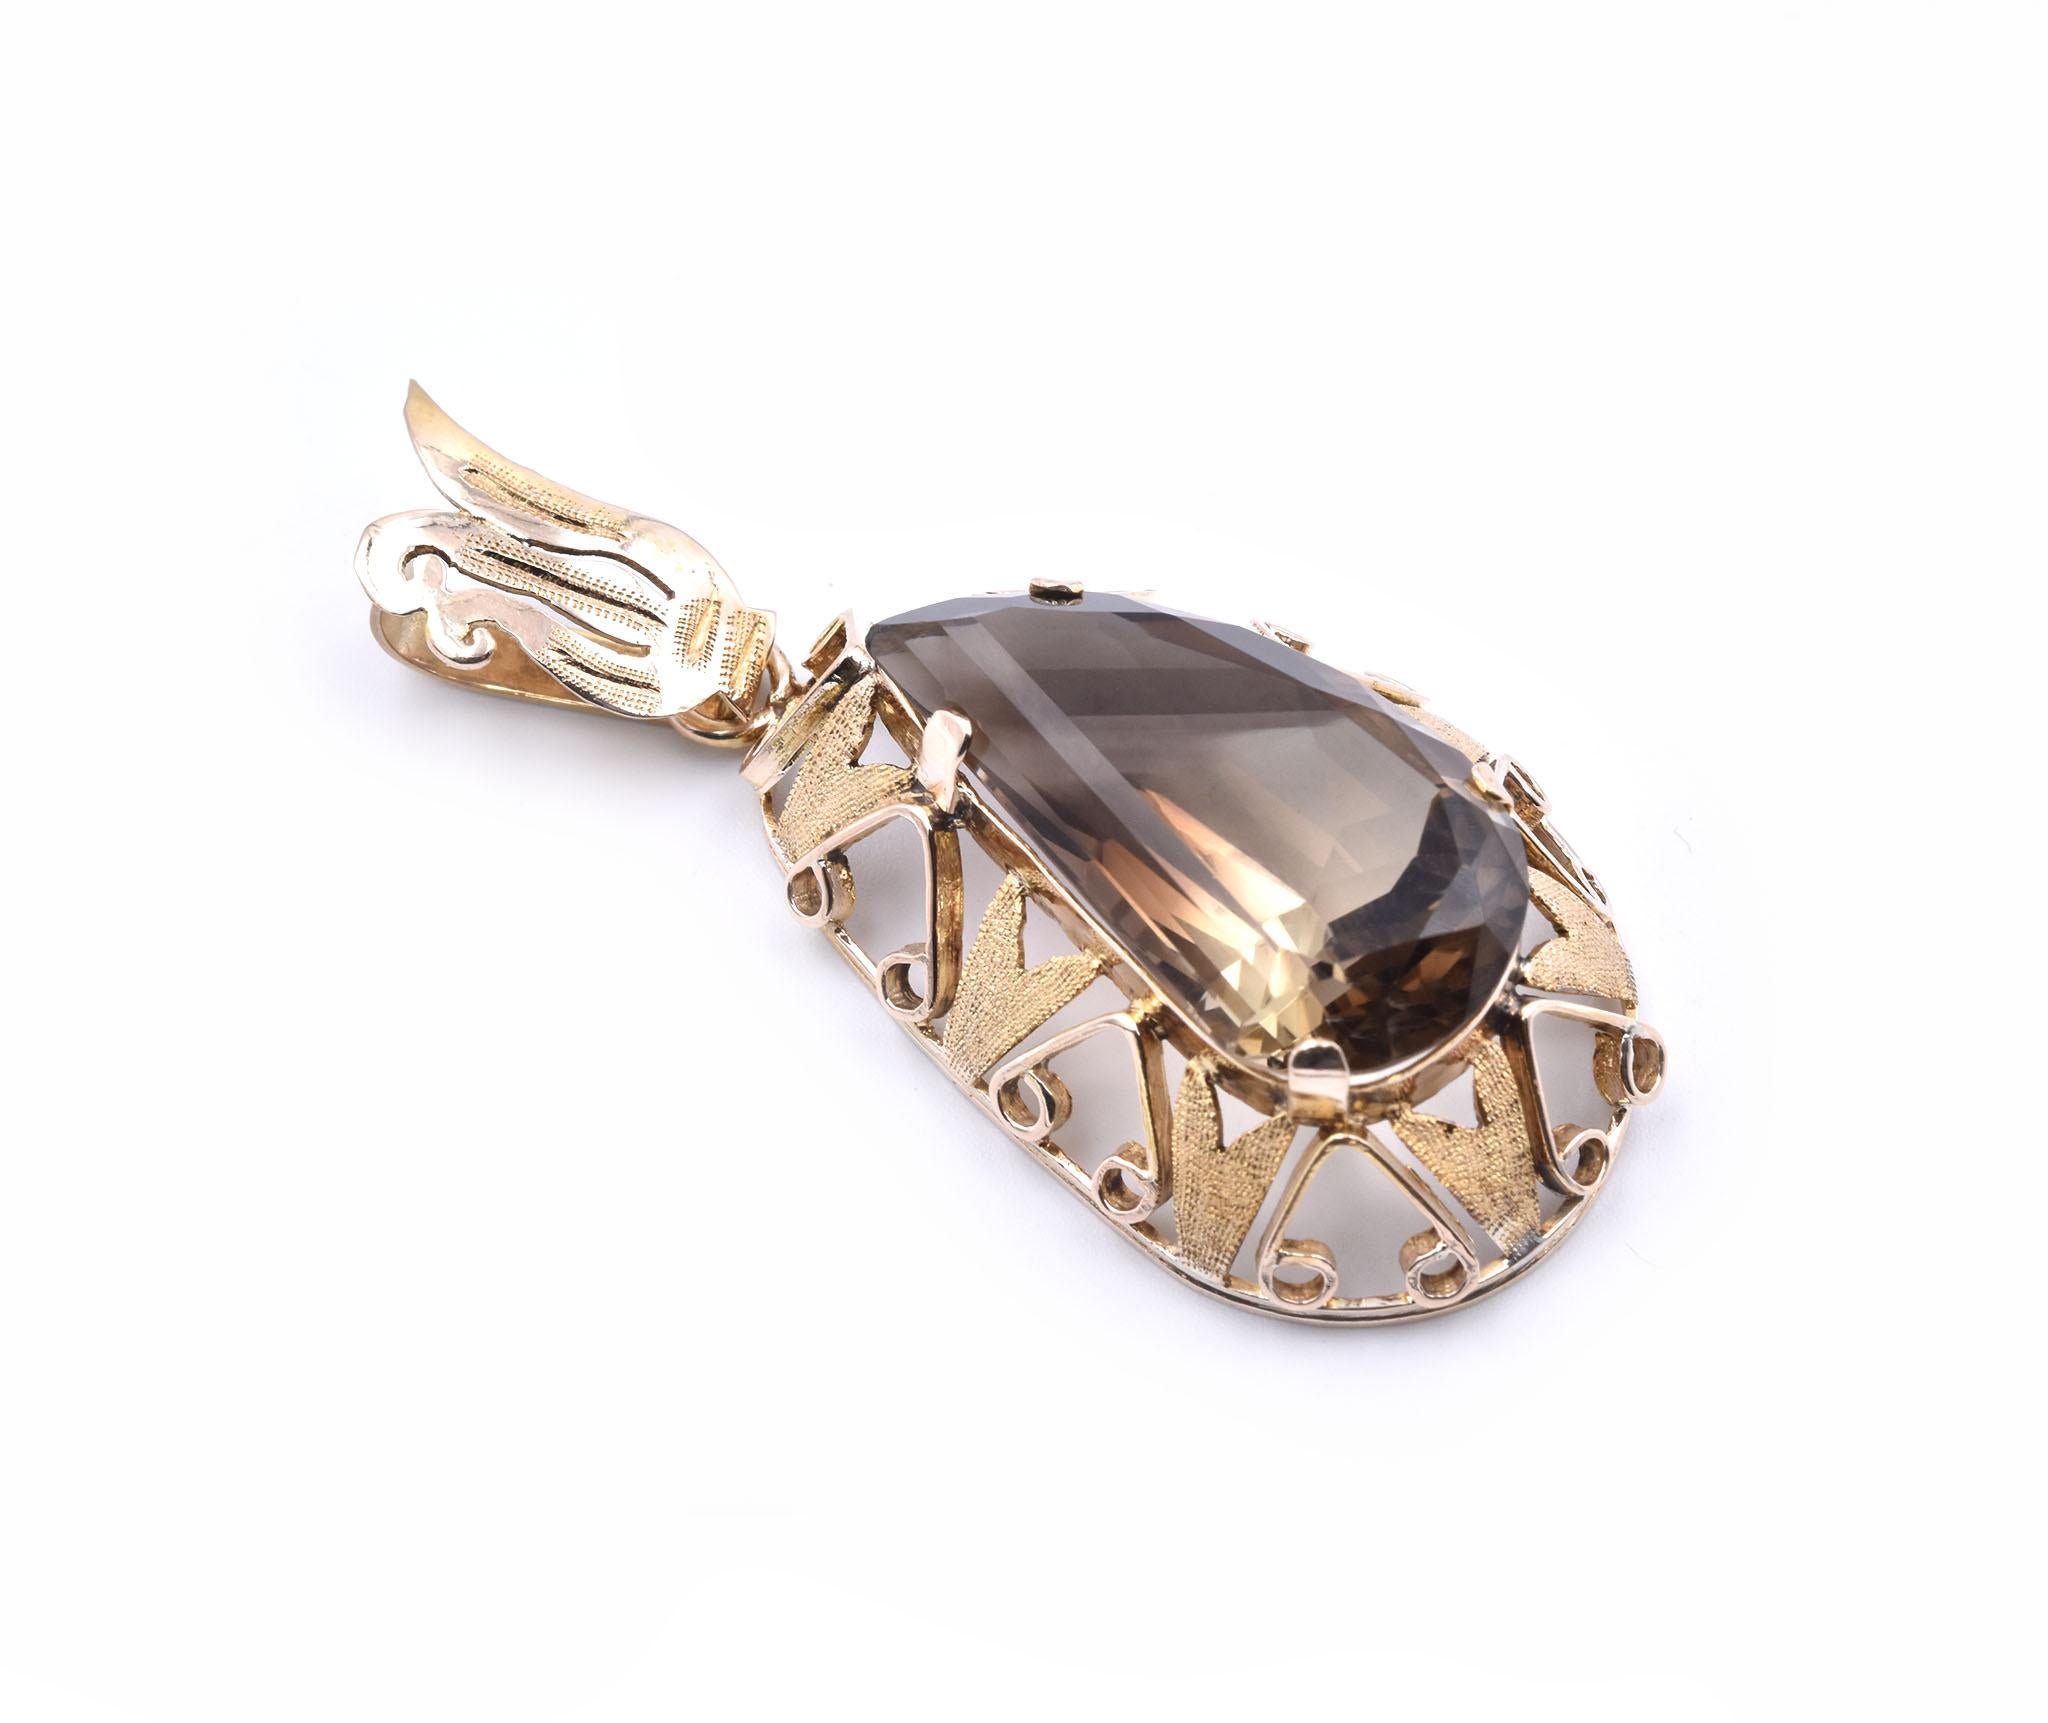 Designer: custom
Material: 10K yellow gold
Smoky Topaz: 1 pear cut = 32.97ct
Dimensions: the pendant measures 61.75mm x 26.18mm 
Weight: 13.03 grams